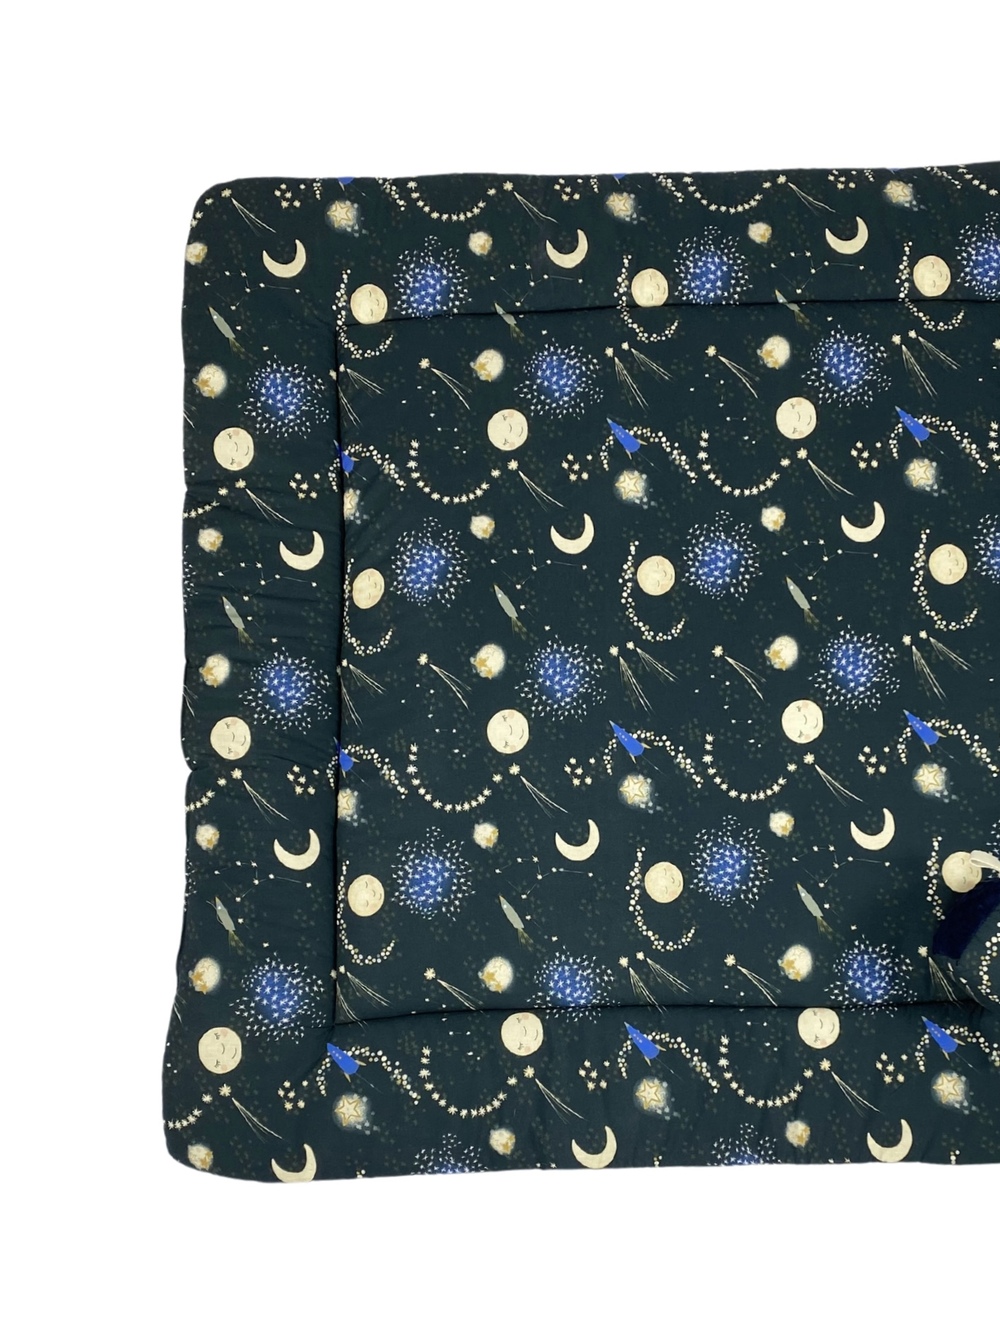 Activity Mat Night Sky  with a game of Cybos